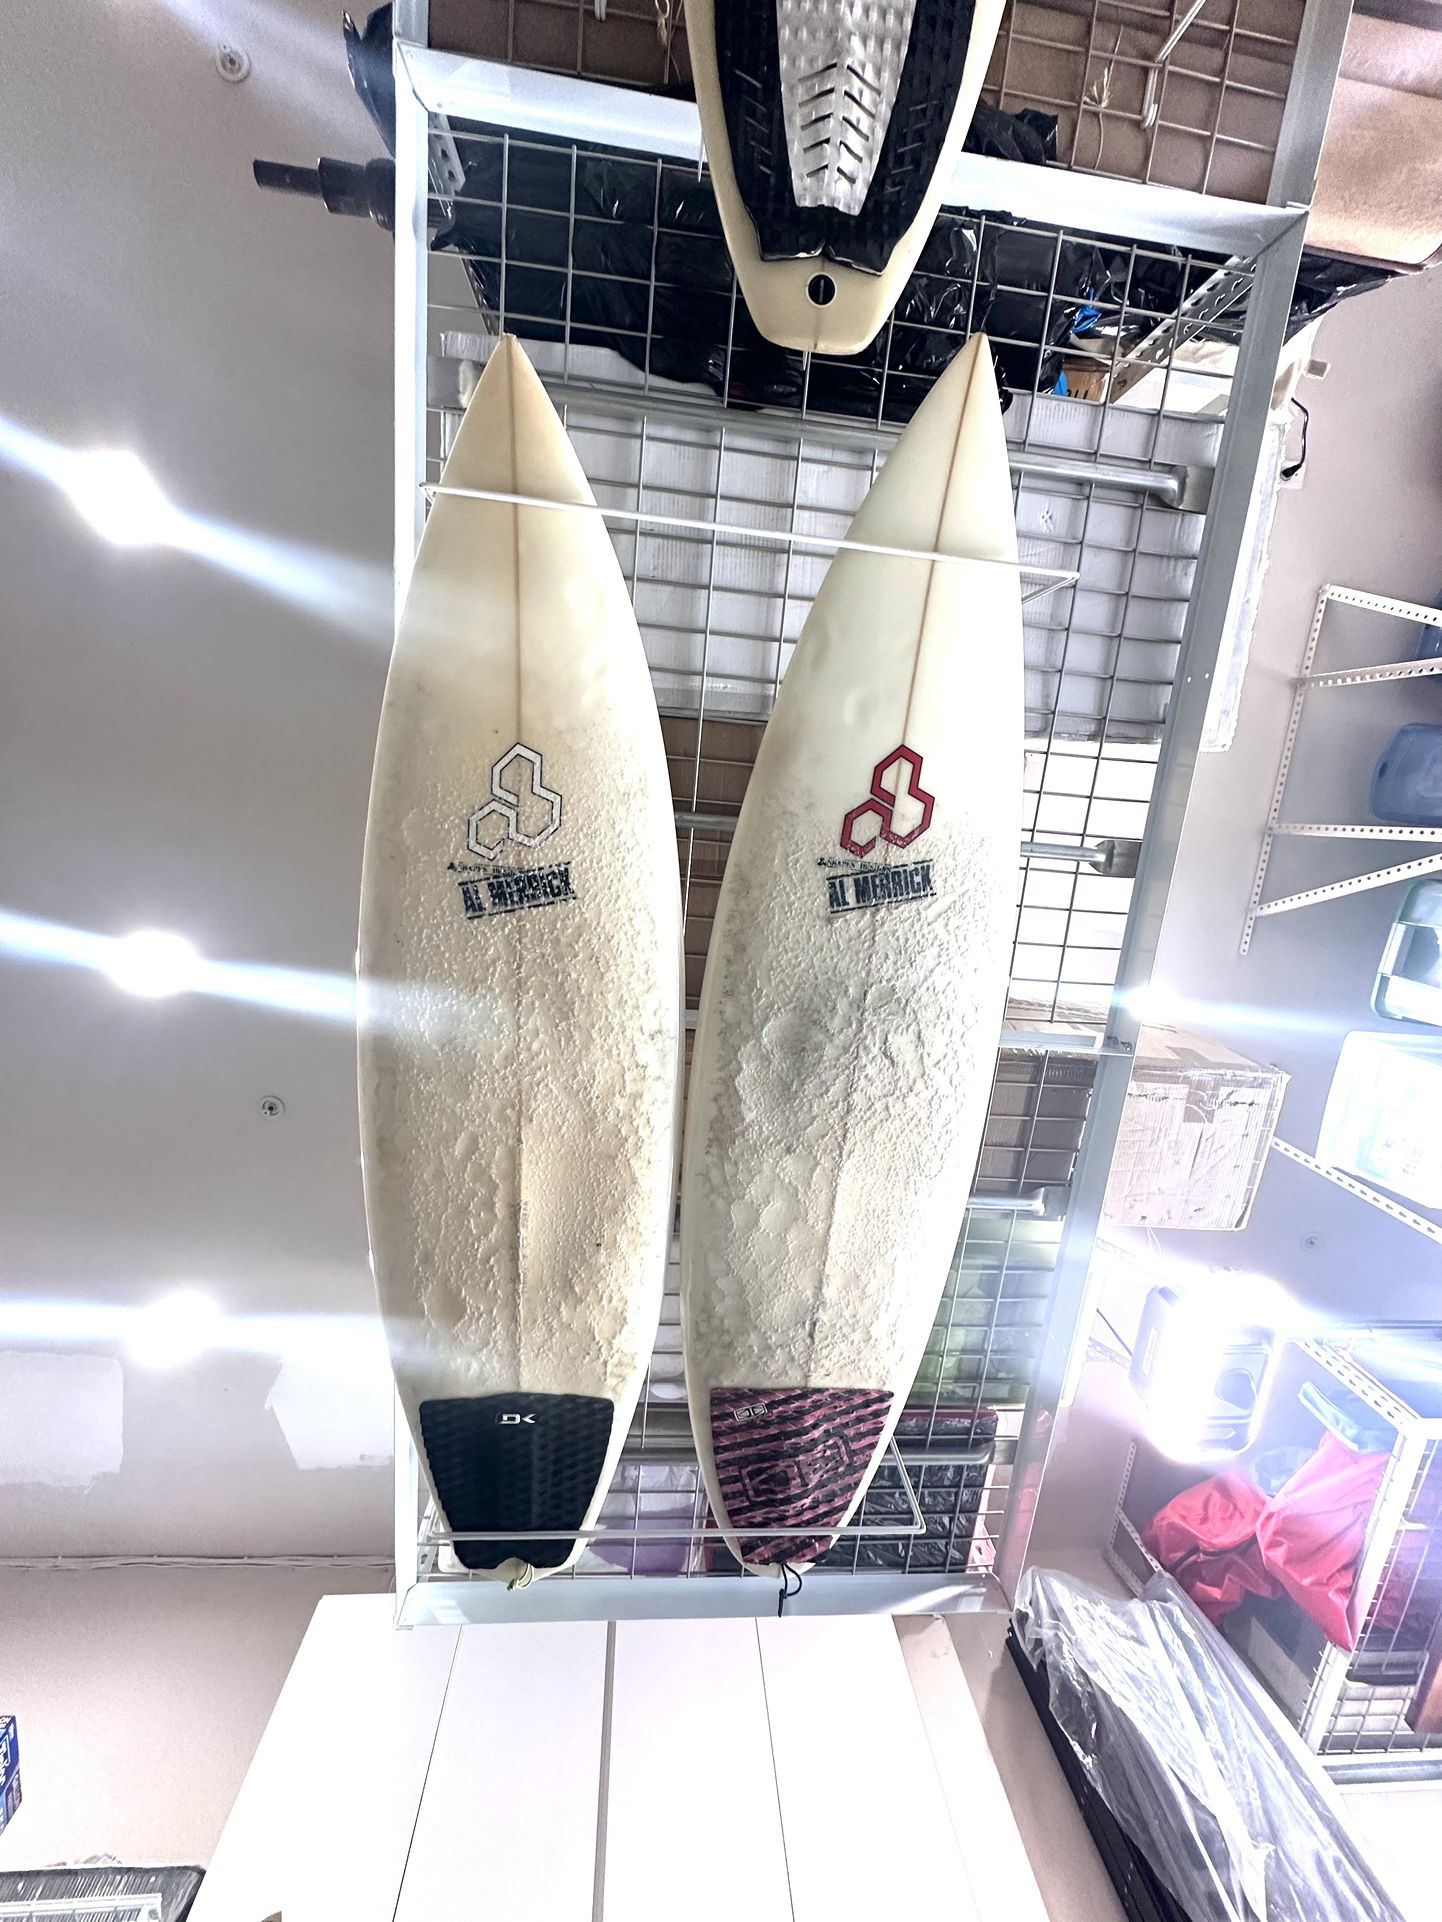 Surfboards. Left: 5”10 27L, right 6”0 27L